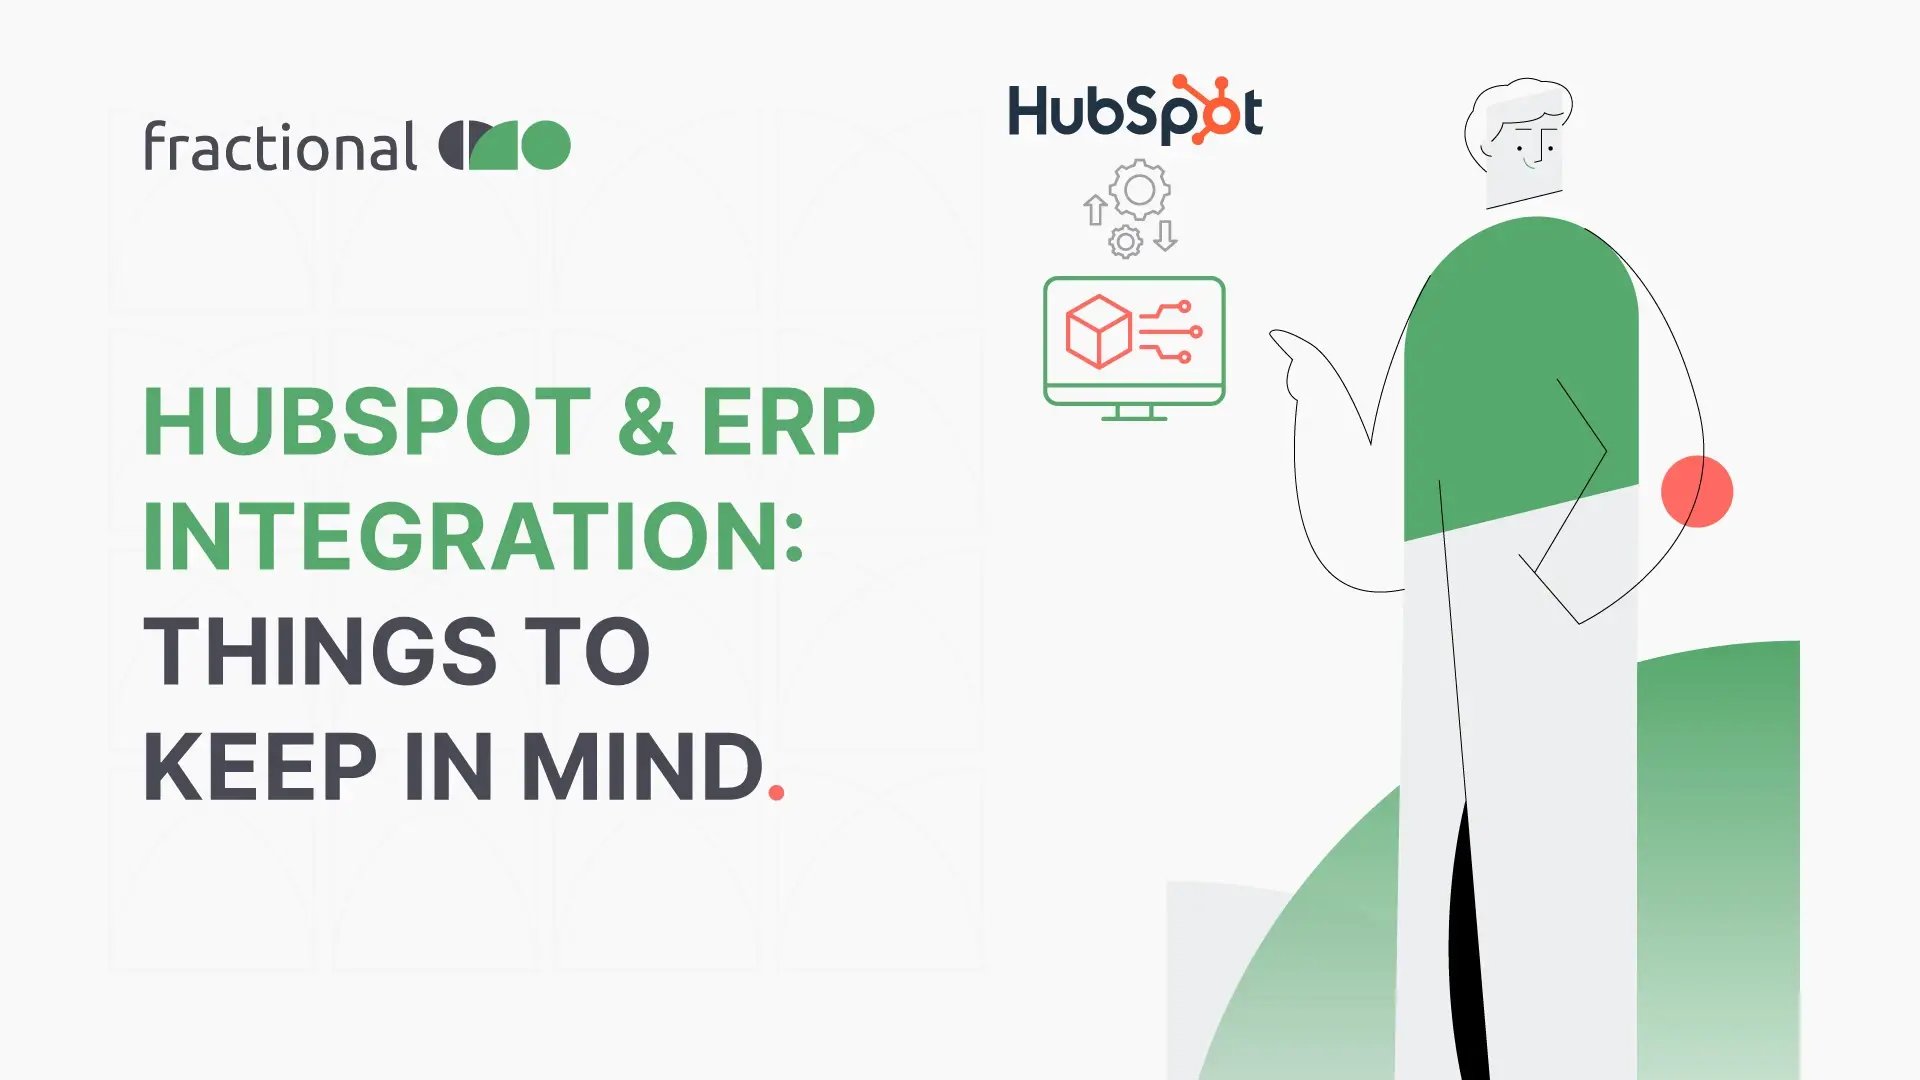 HubSpot & ERP Integration: Things to Keep in Mind